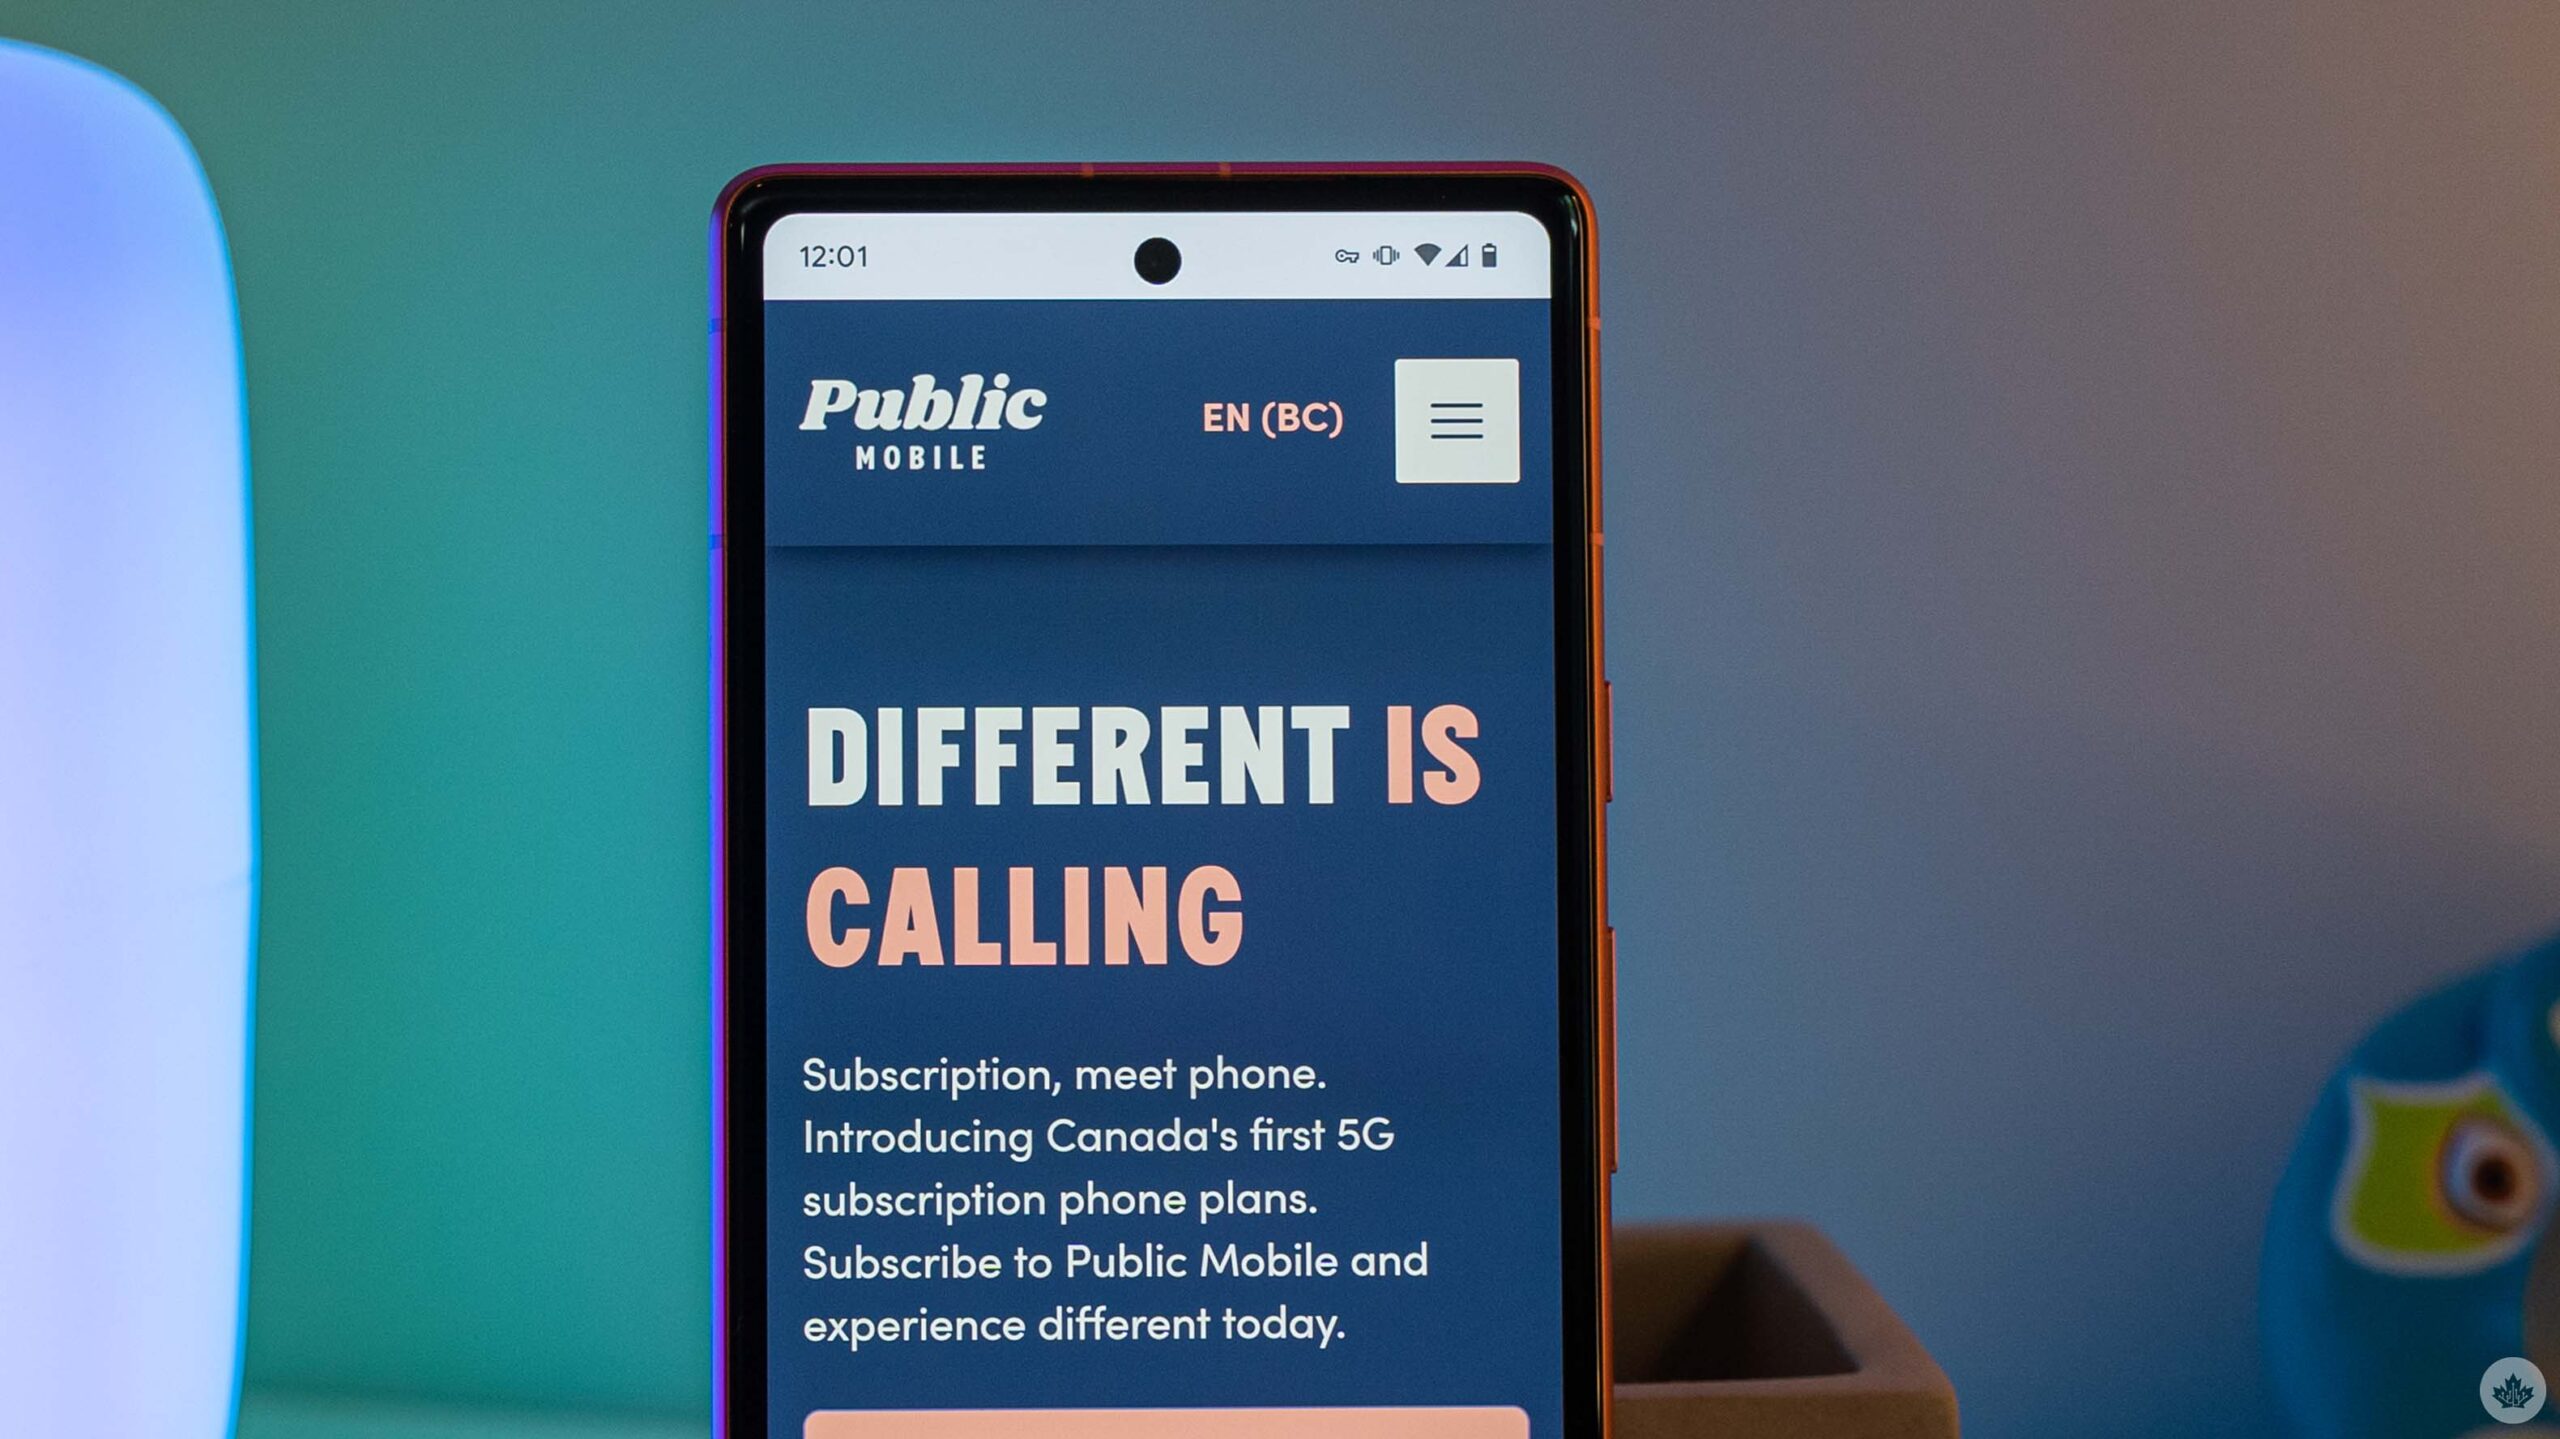 Public Mobile Reintroduces $29/20GB 4G Plan Amid Competitors' Price Increases 26